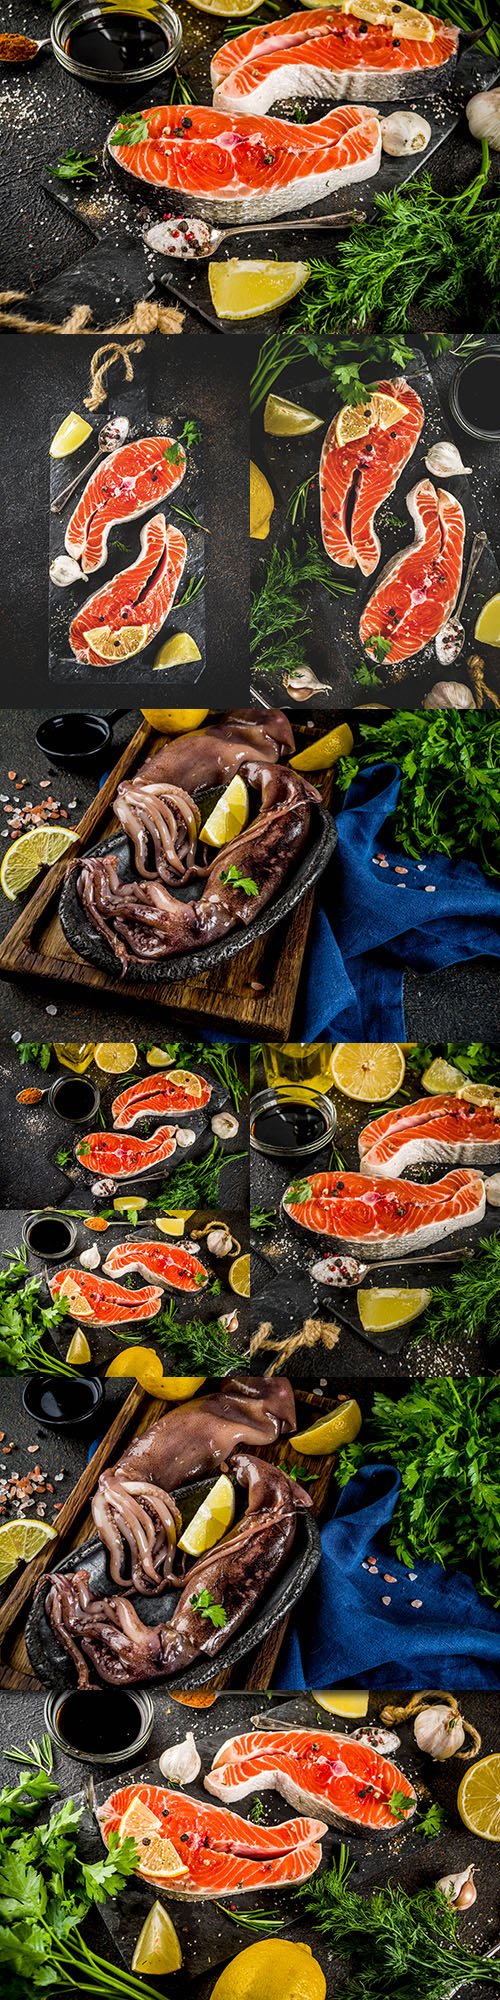 Salmon steak and octopus with spices and lemon